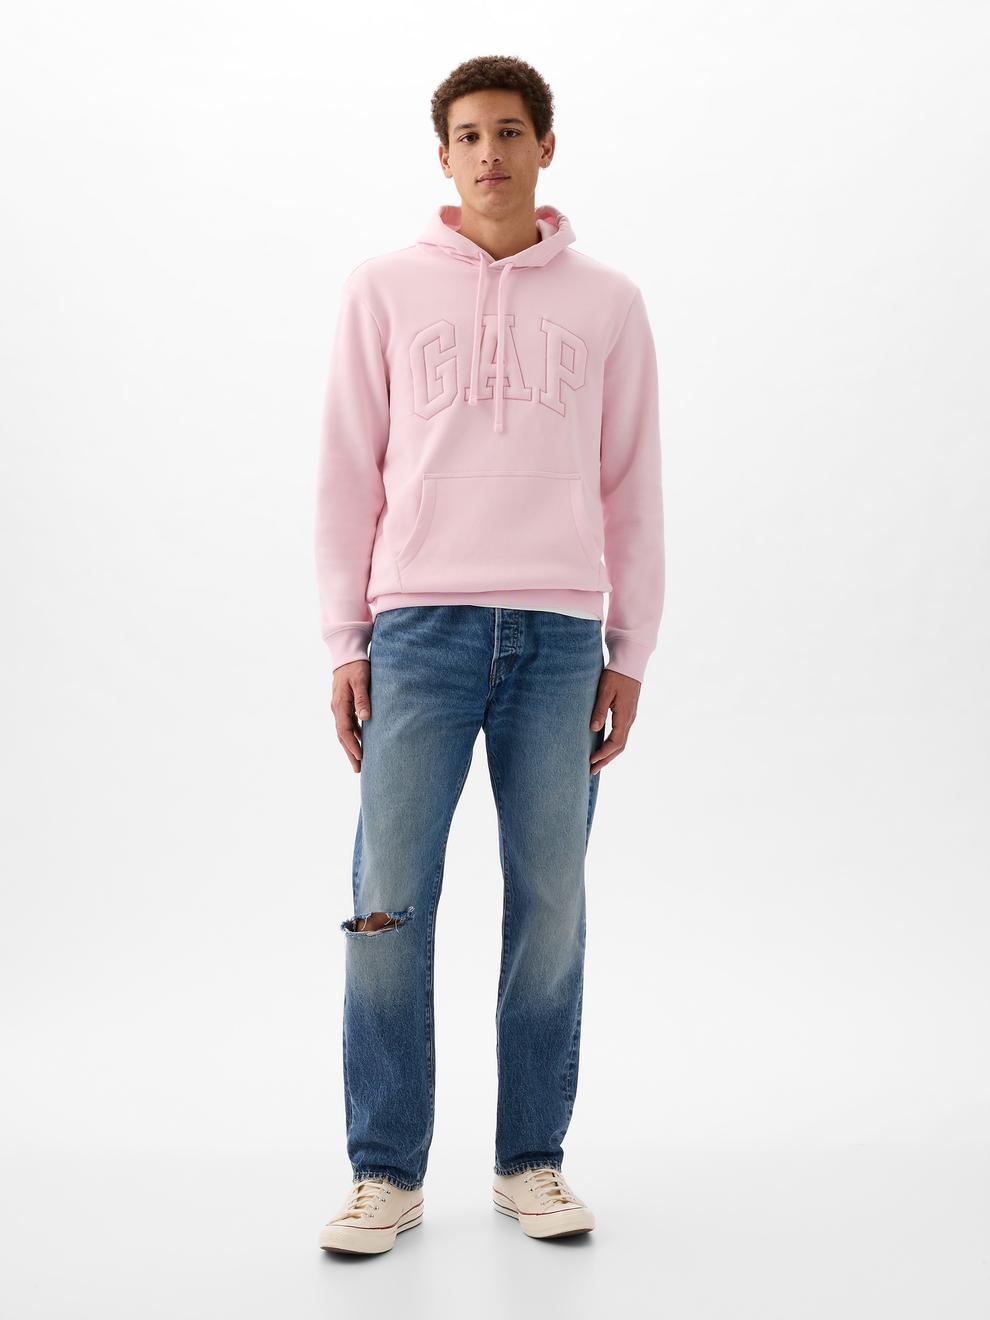 Puff Gap Arch Logo Hoodie offers at 119 Dhs in Gap